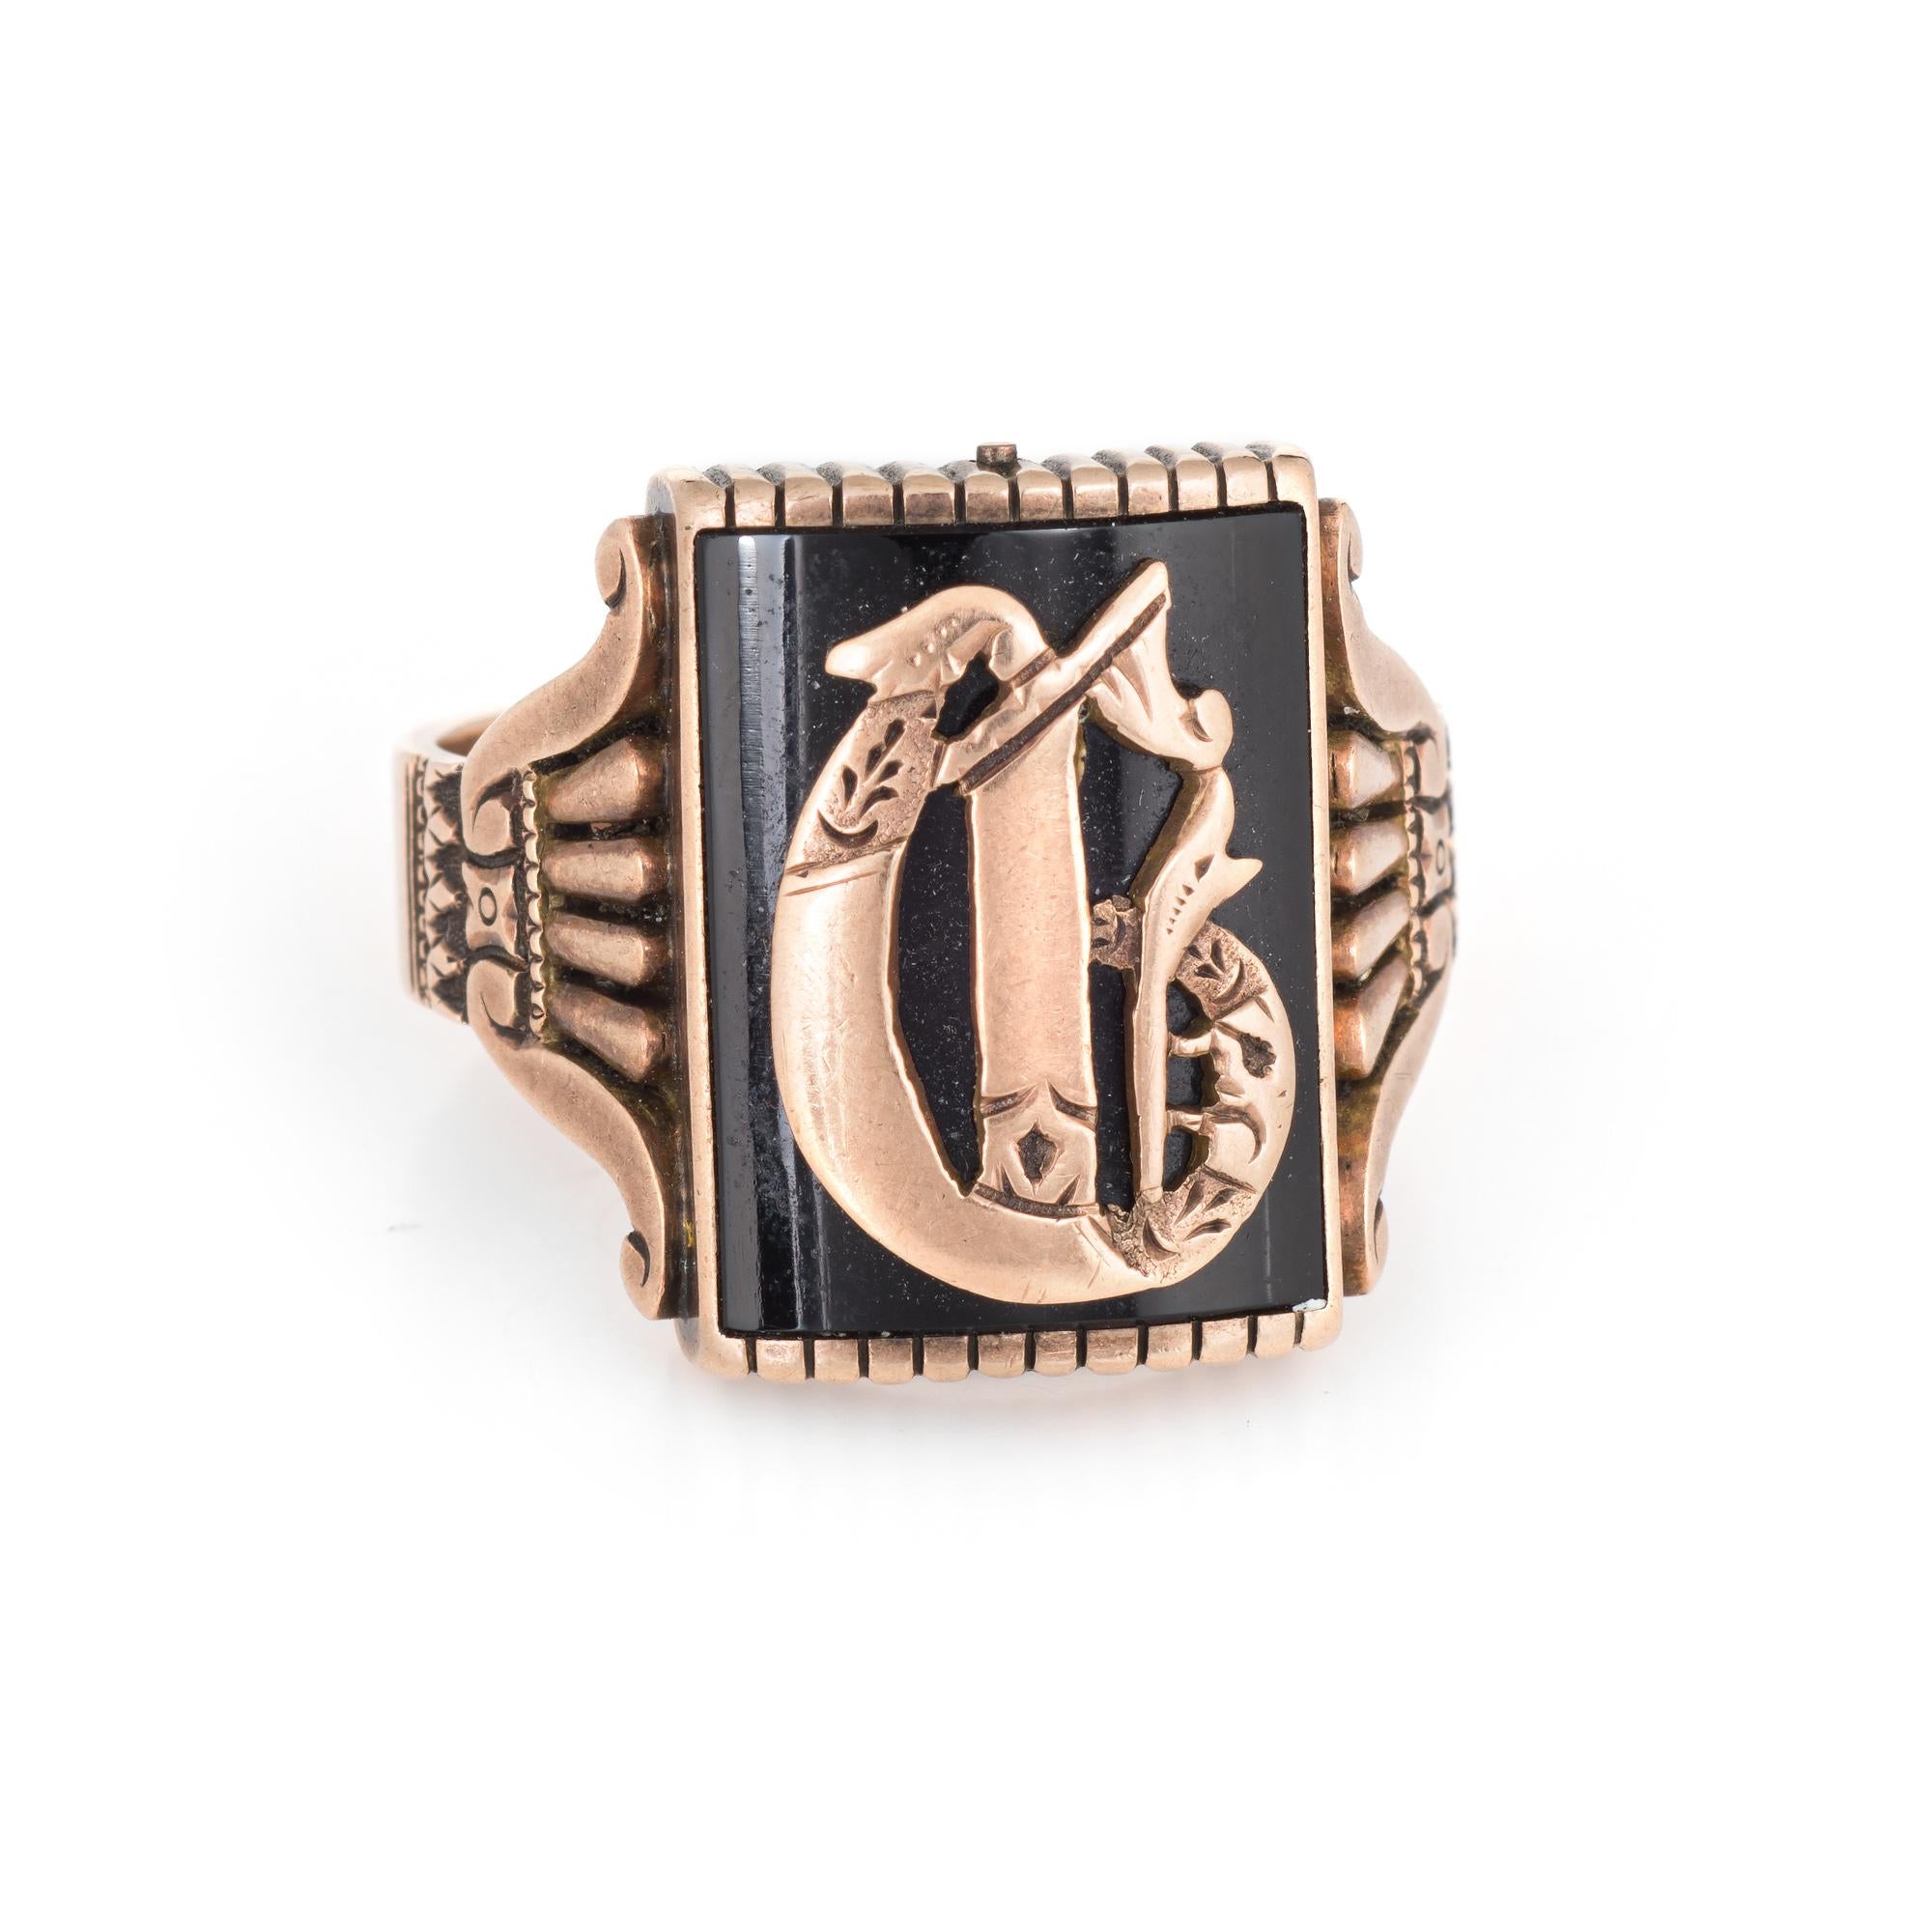 Finely detailed Victorian era signet ring (circa 1880s to 1900s) crafted in 14 karat rose gold.

The initial is set upon a black onyx mounting that measures 17mm x 13mm.

The handsome ring features scrolled detailing to both side shoulders. The